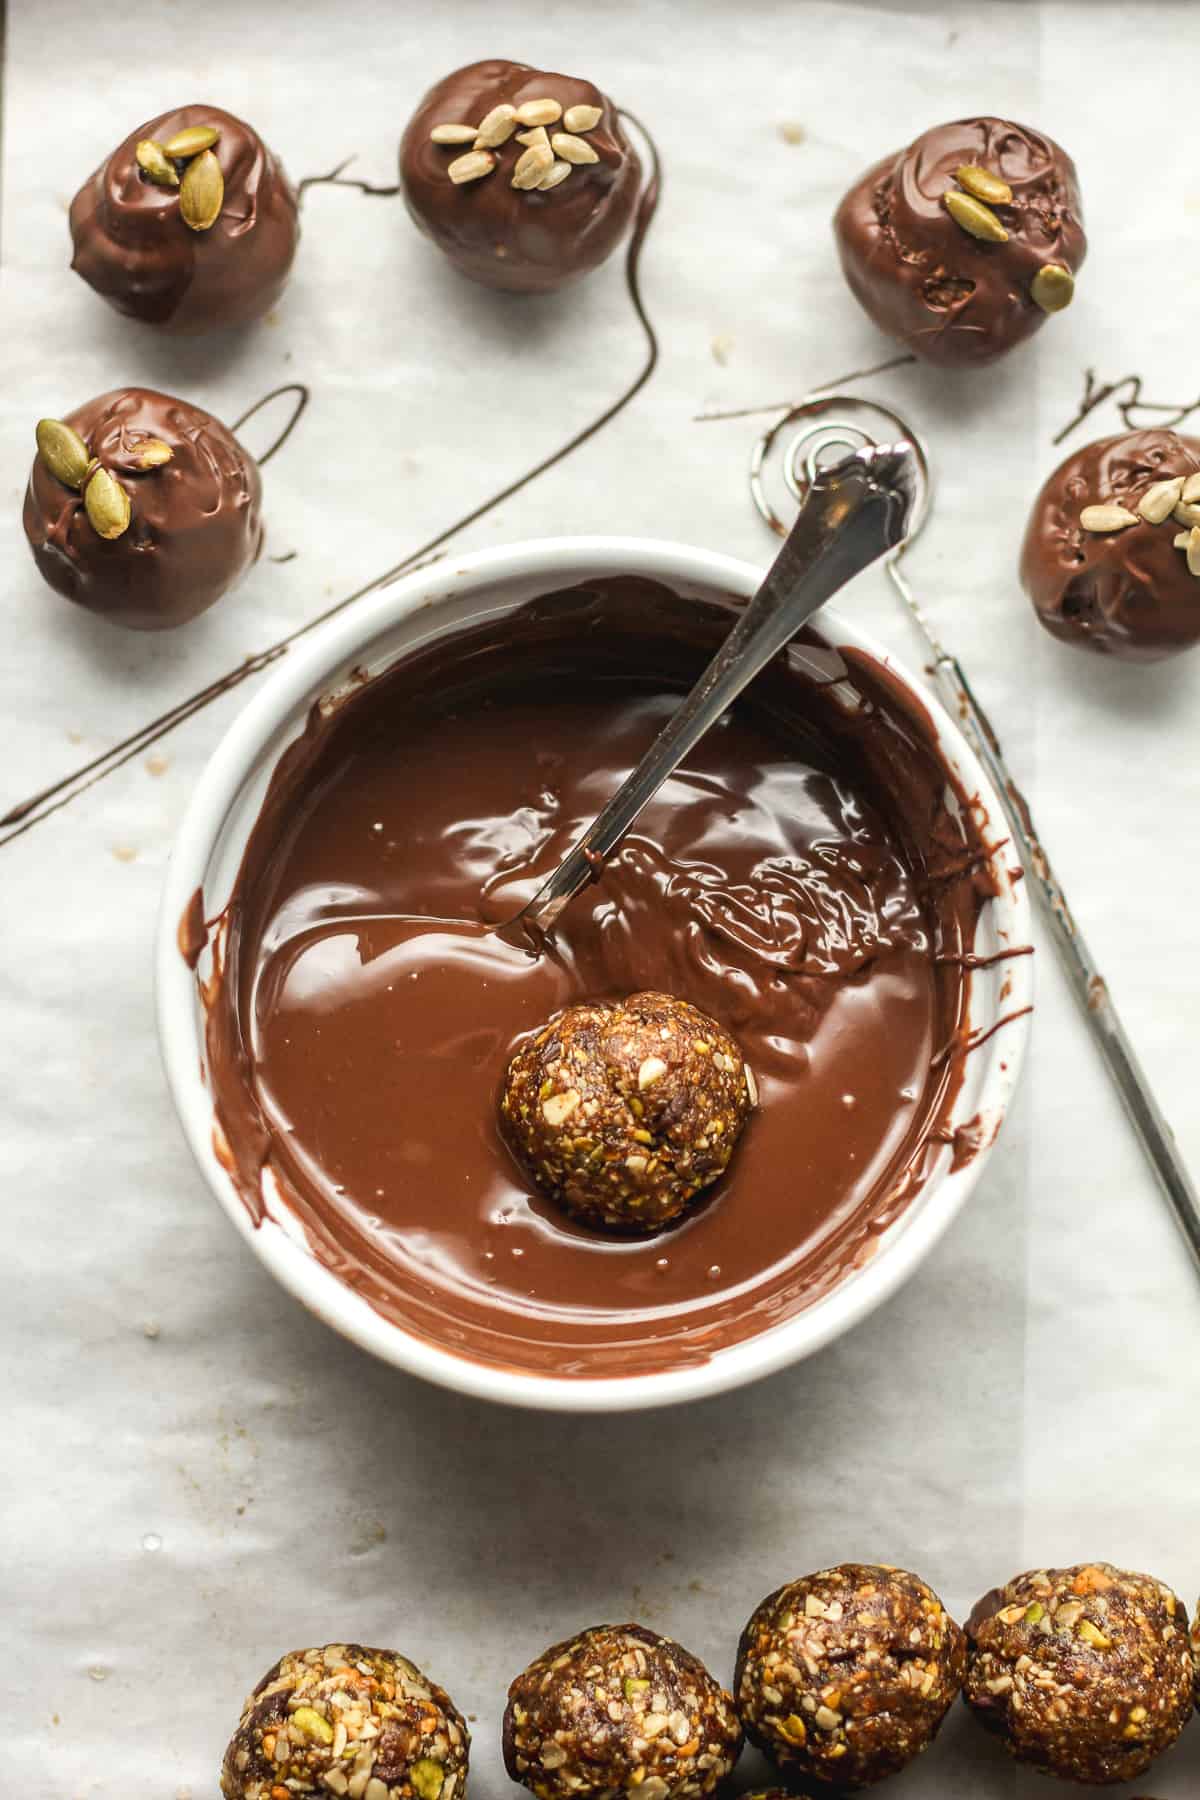 A sheet pan with a bowl of chocolate with date nut ball inside.